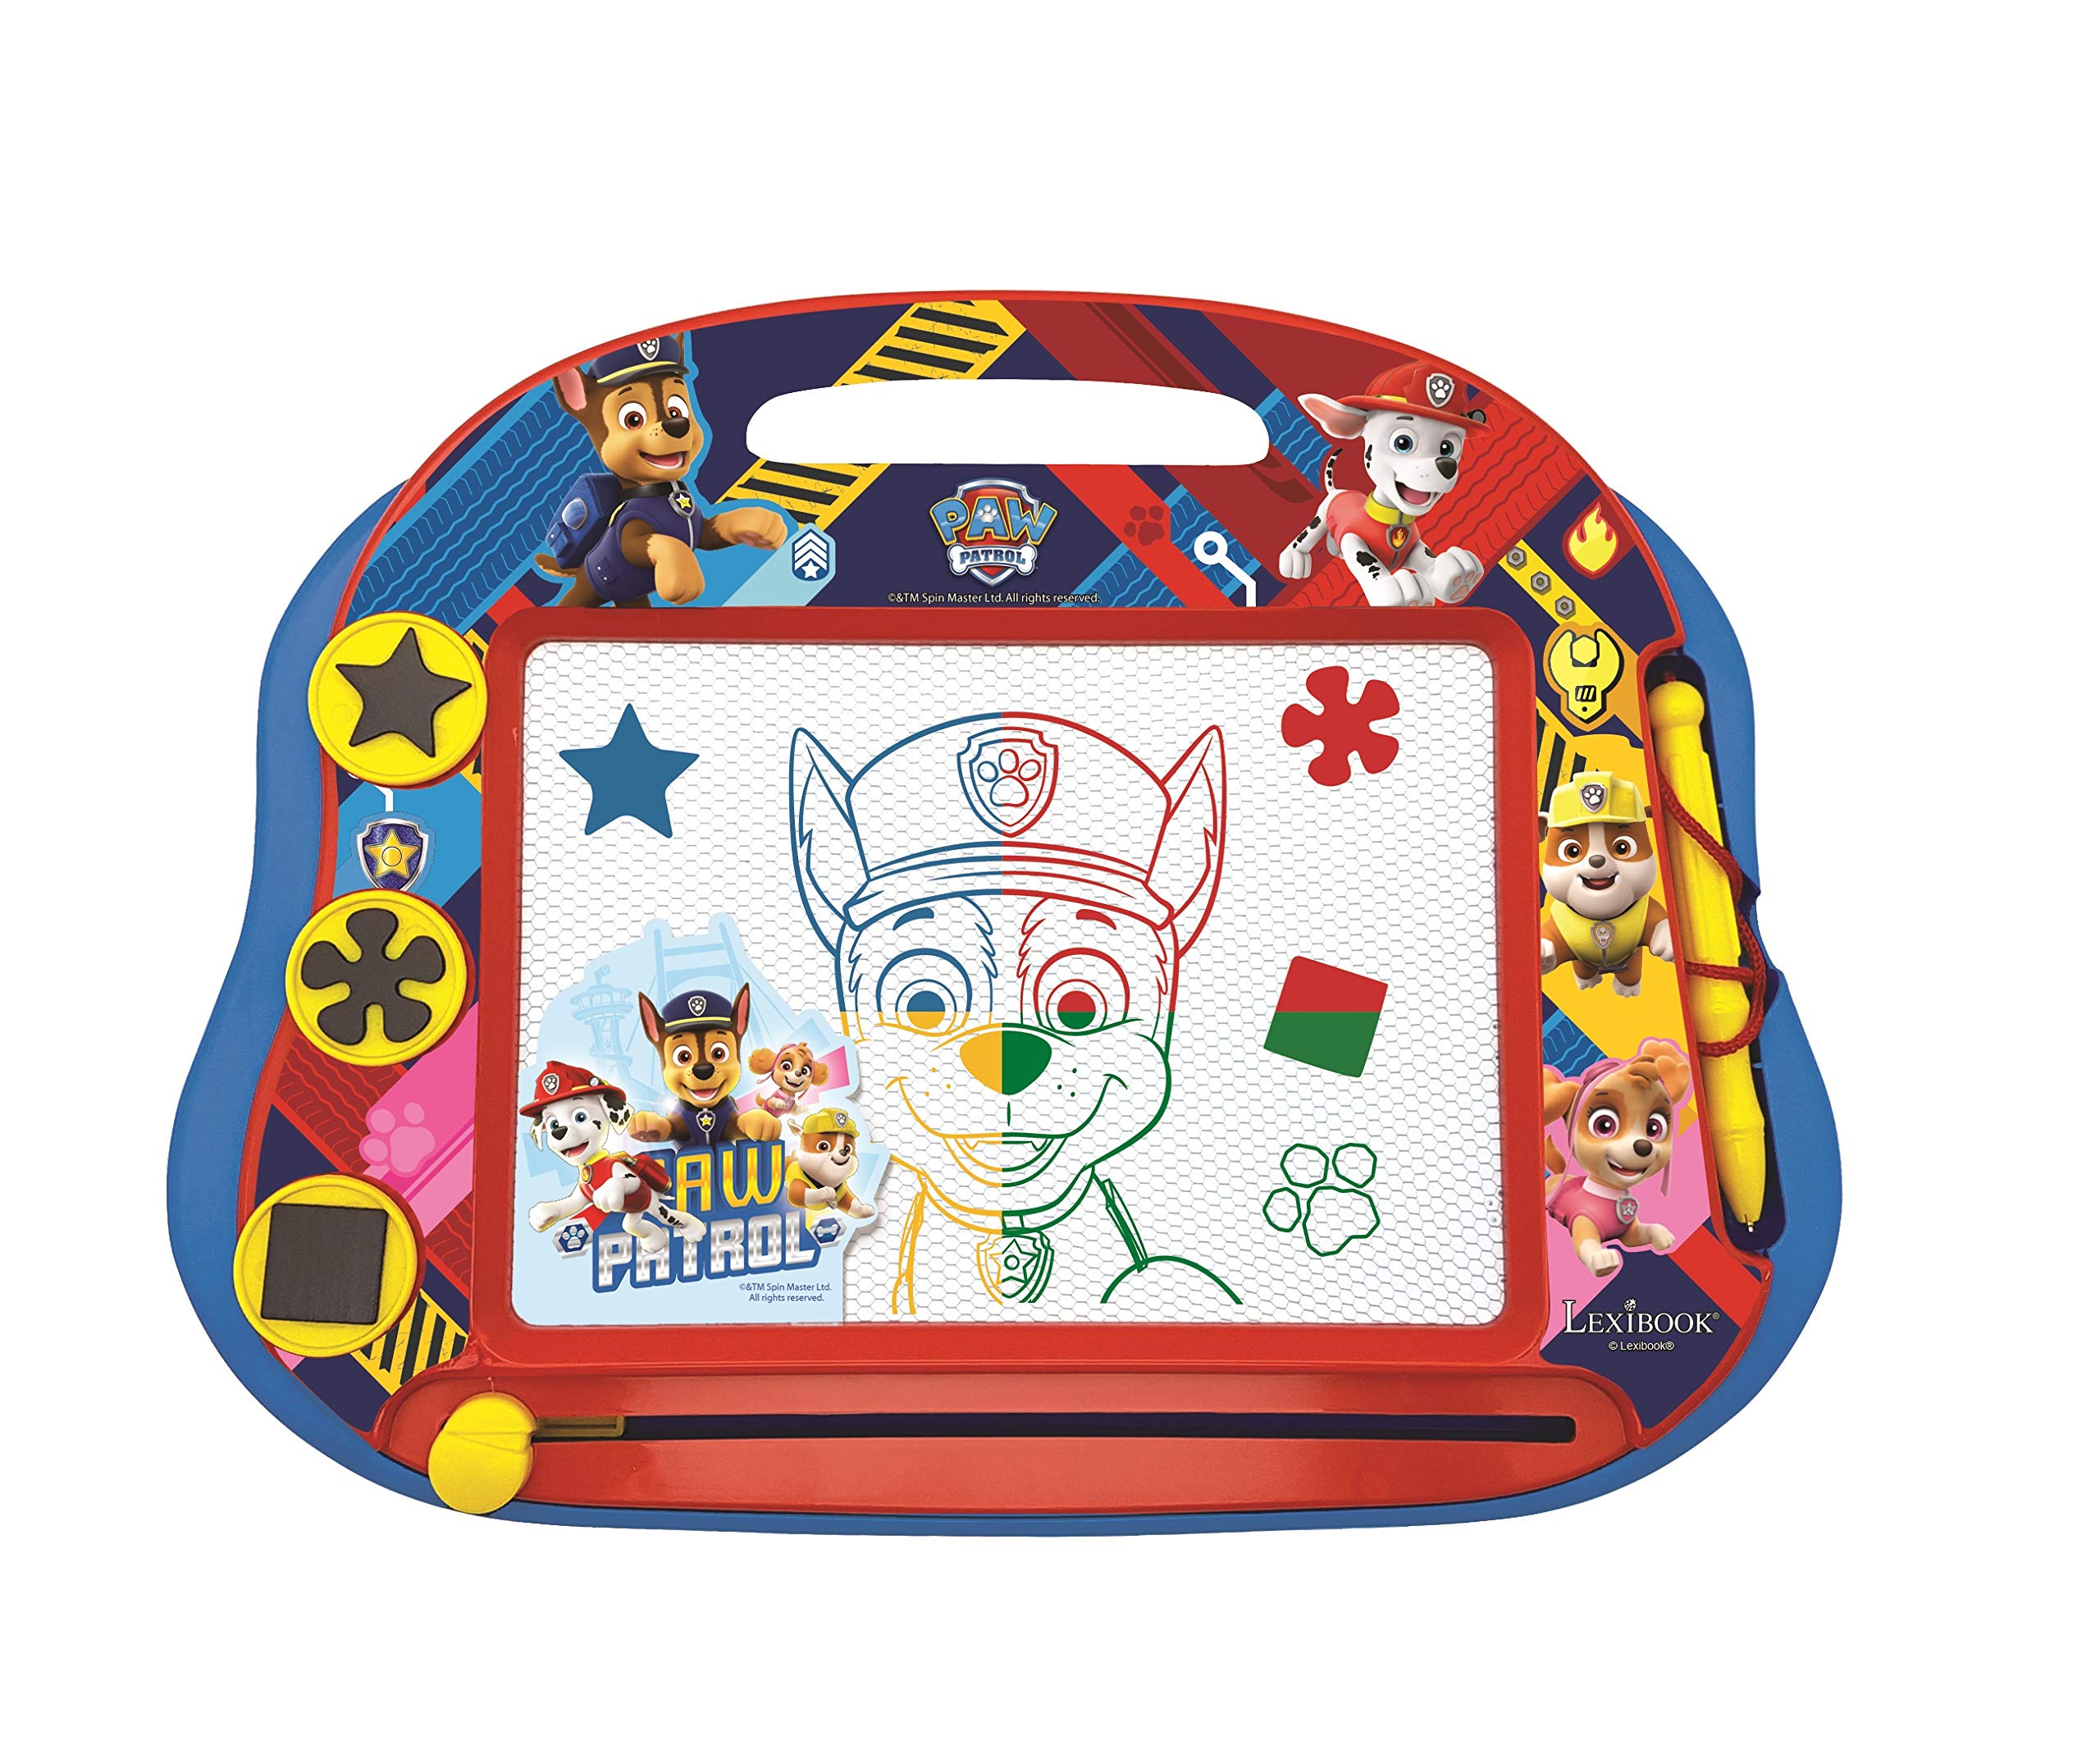 LEXiBOOK Paw Patrol Multicolor Magic Magnetic Drawing Board, Artistic Creative Toy for Girls and Boys, Stylus Pen and Stamps, Red/Blue, CRPA550